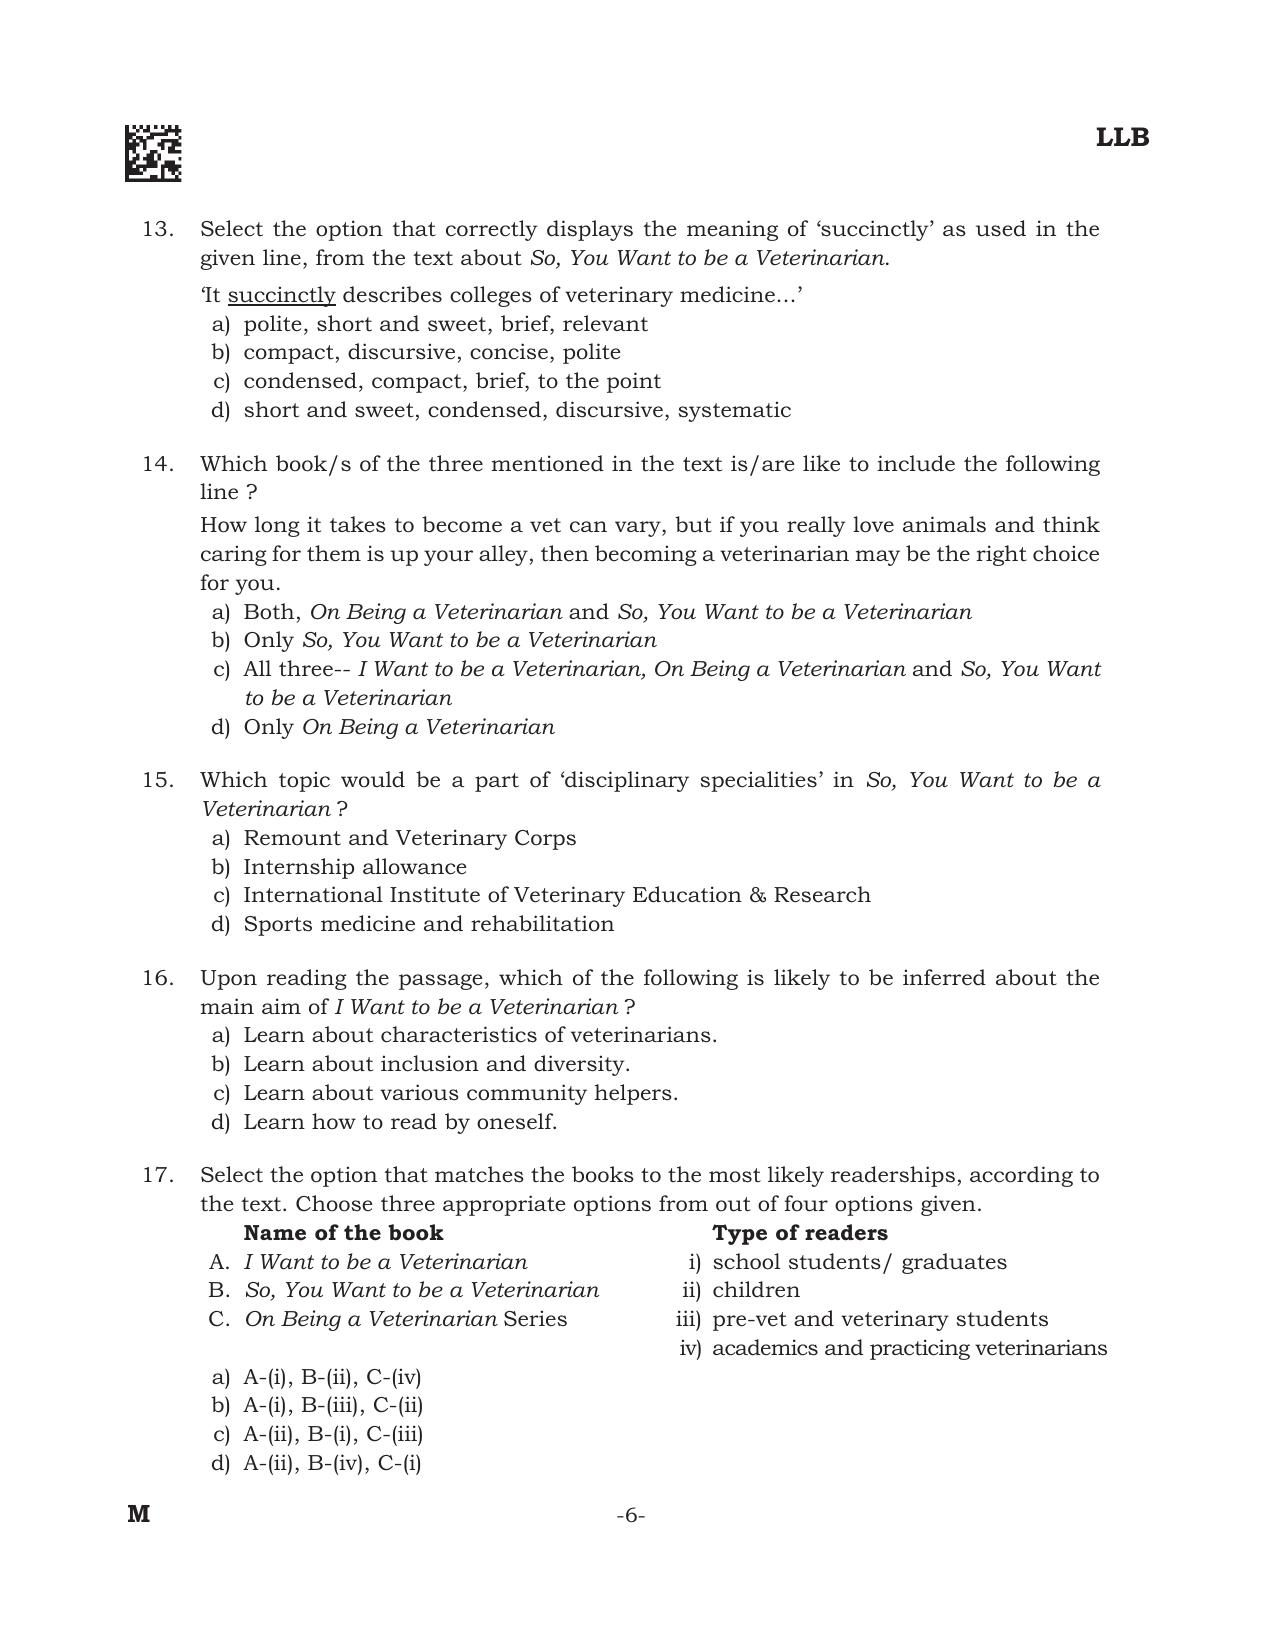 AILET 2022 Question Paper for BA LLB - Page 6